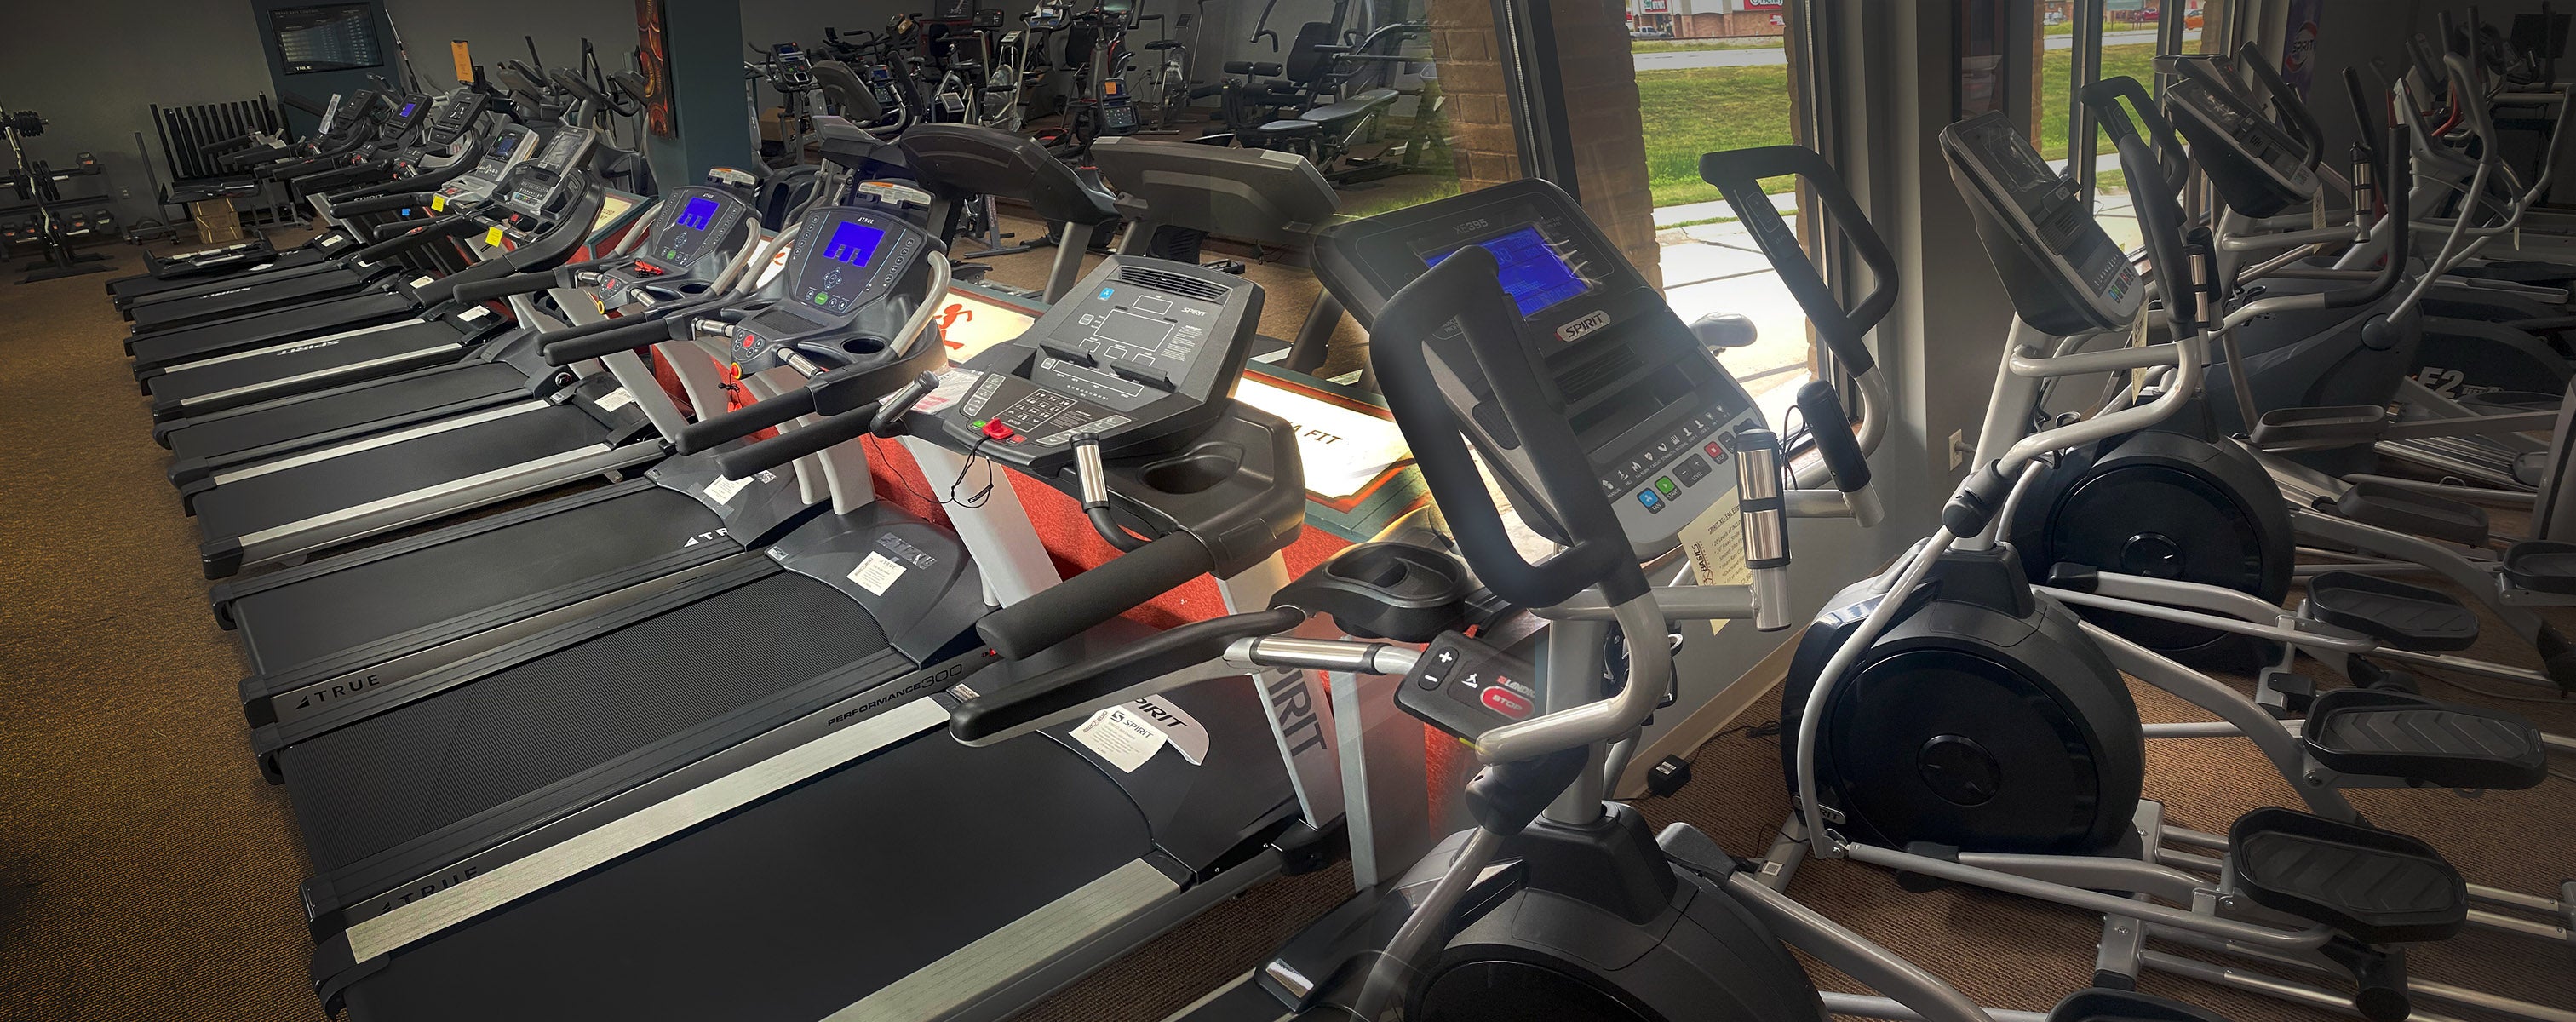 Choosing Between Treadmills and Ellipticals: Finding the Right Fit for Your Fitness Journey